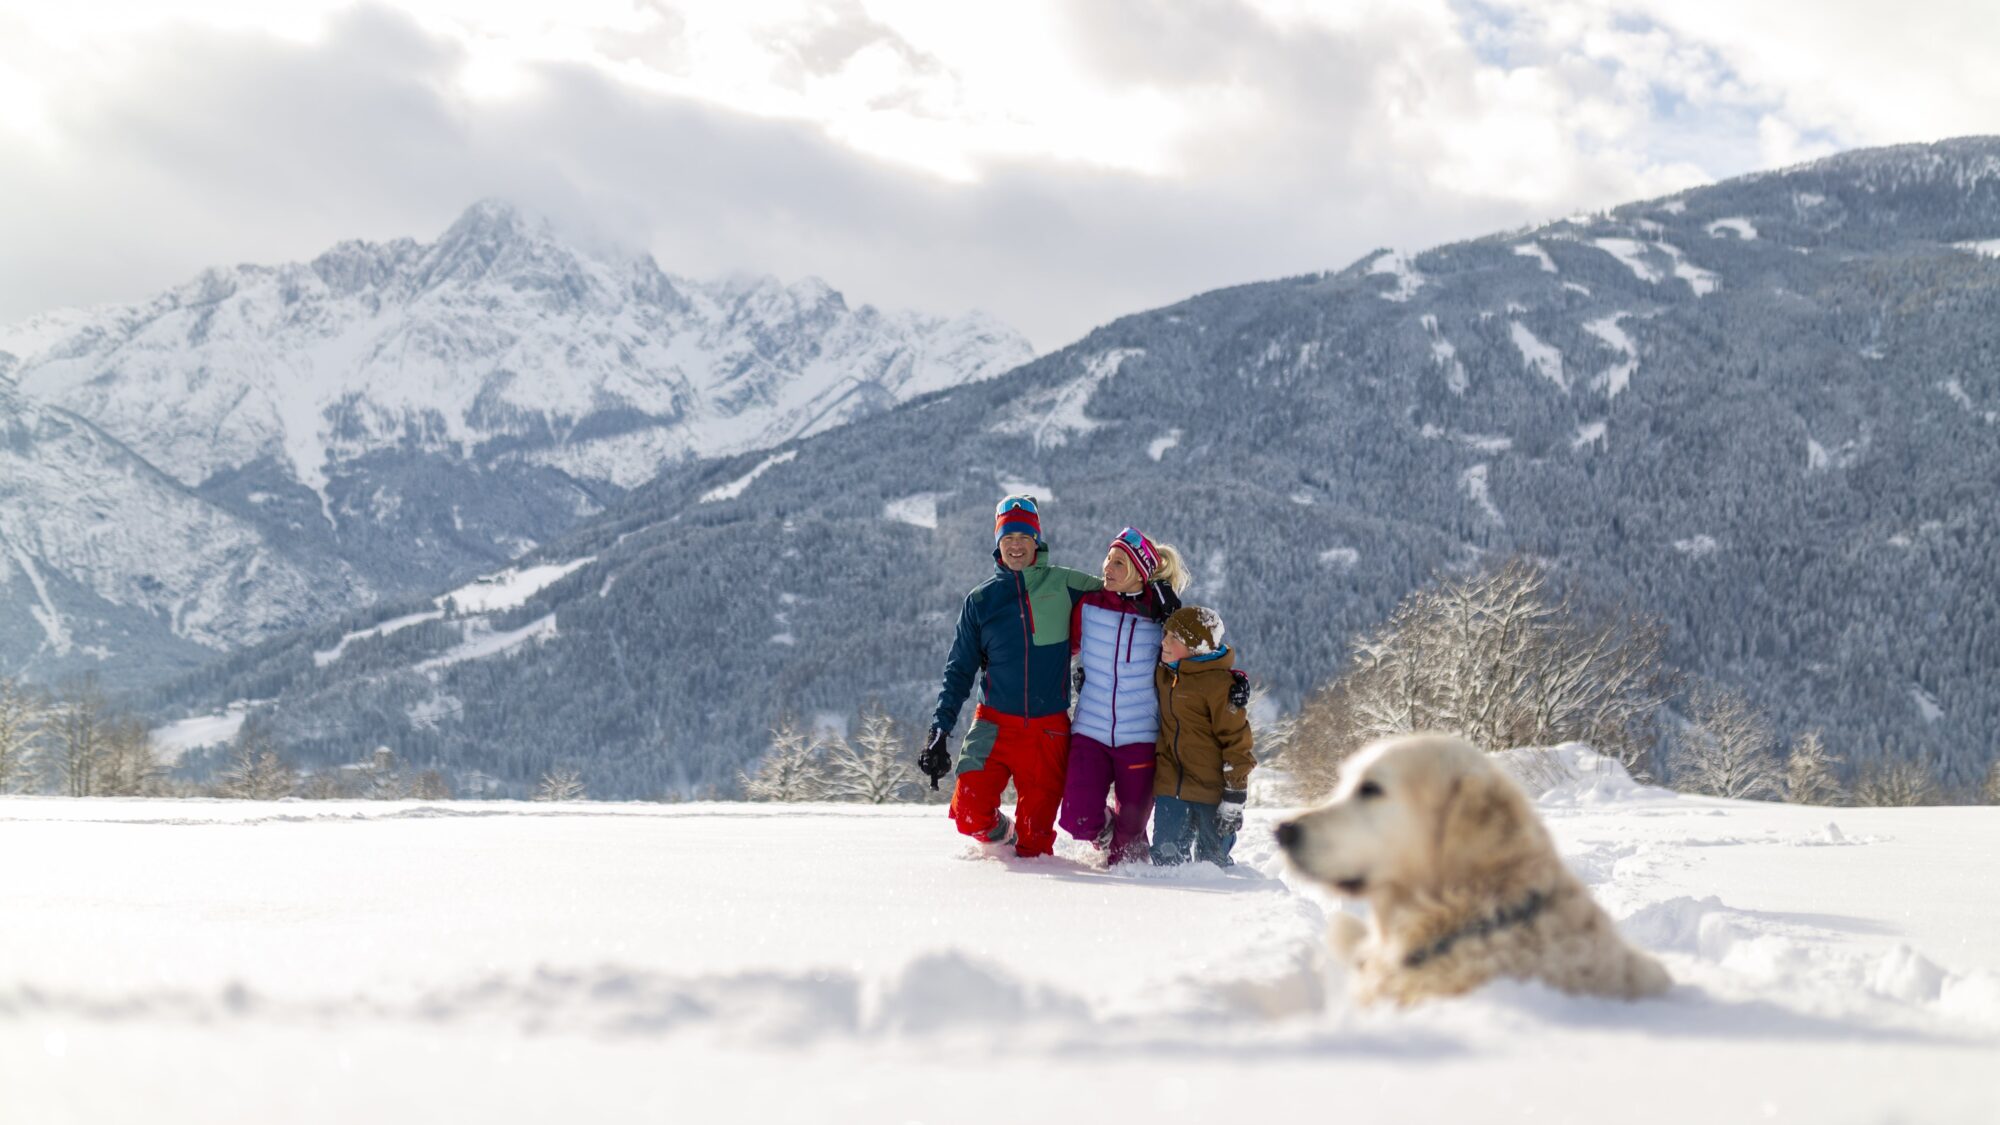 Winter hiking with a dog is definitely possible in the best alpine hiking hotels.